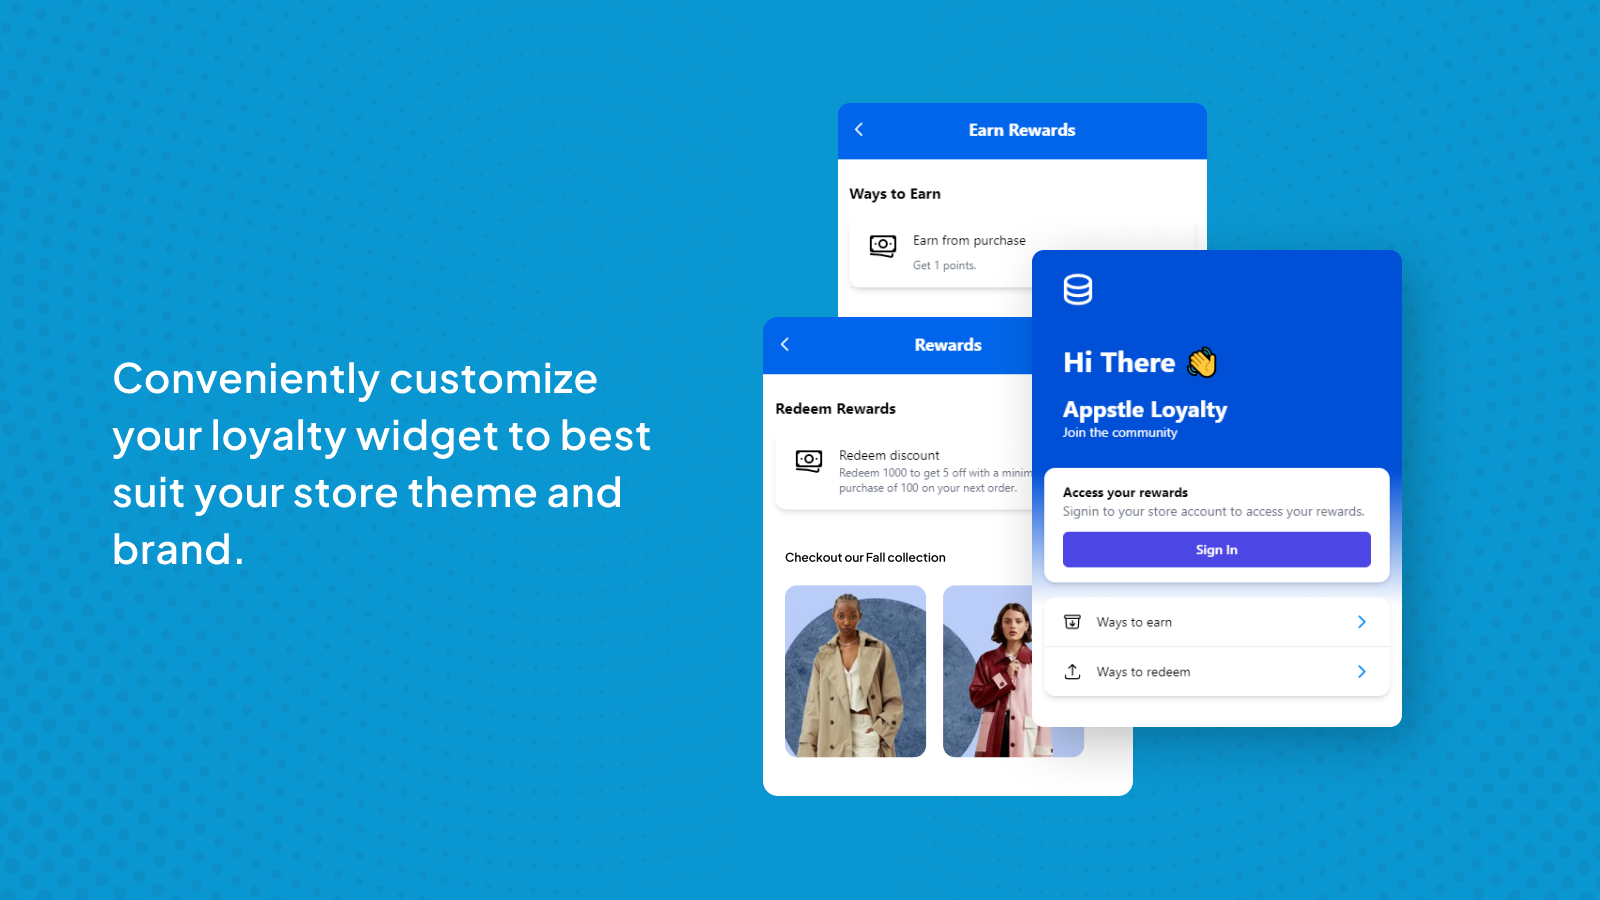 Conveniently customize your loyalty widget